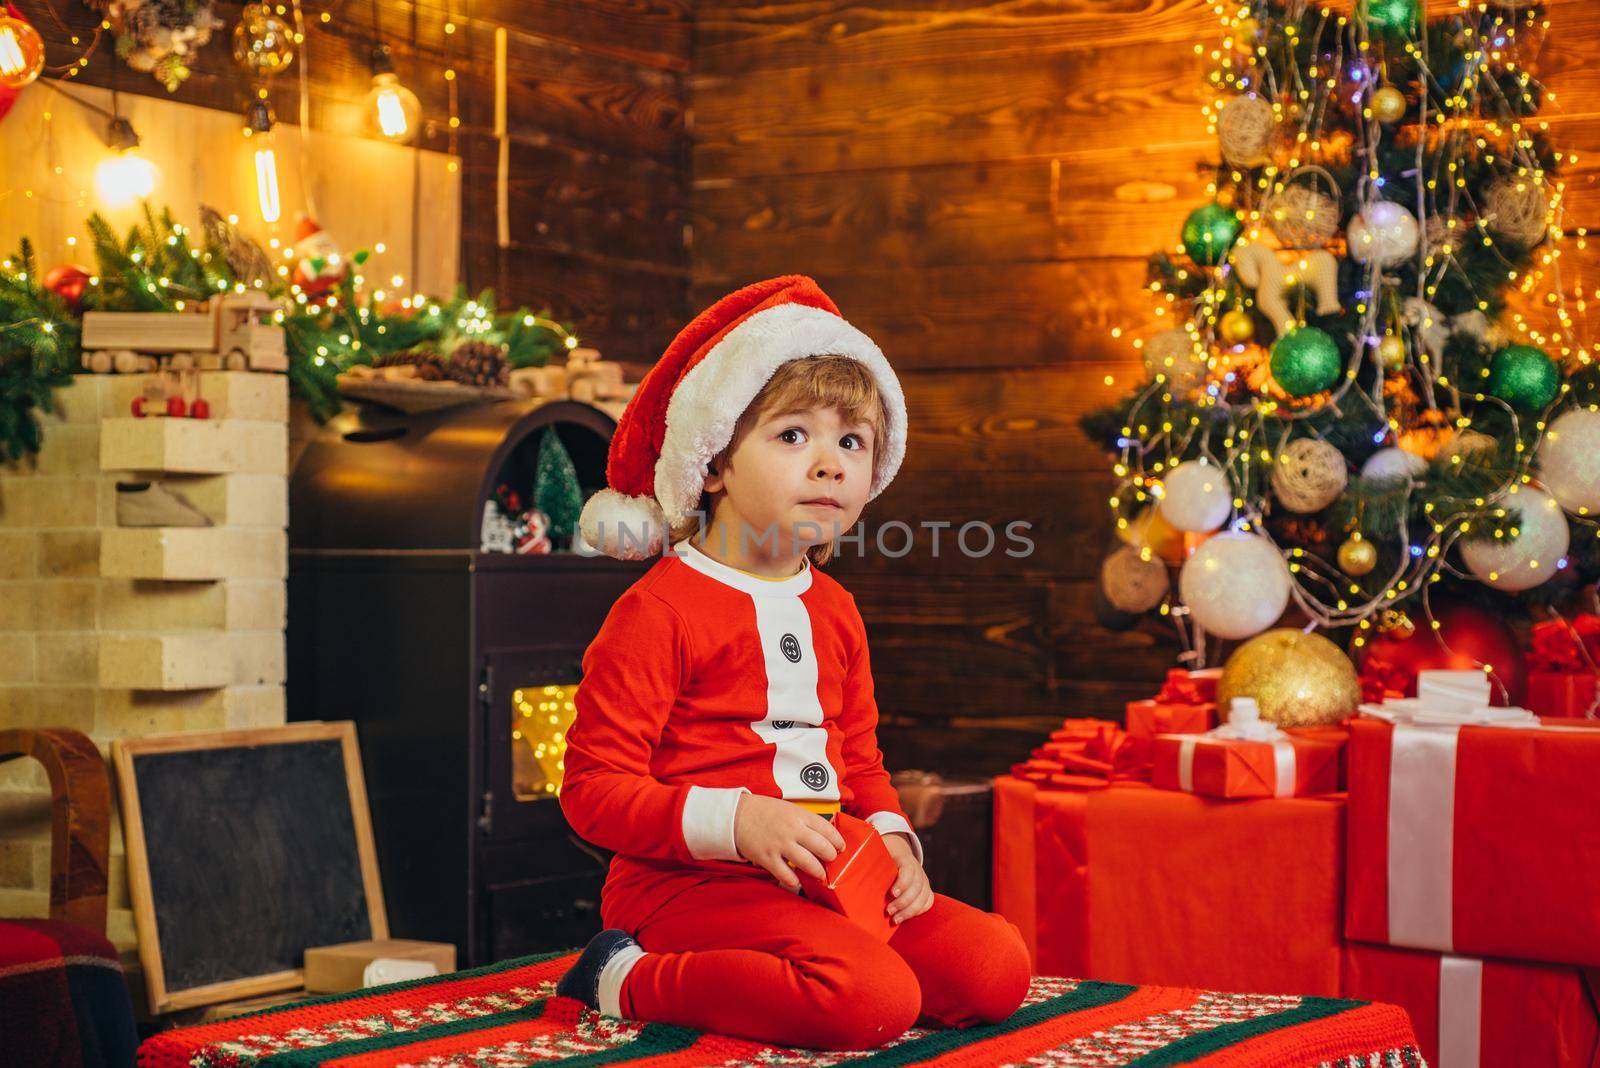 Cute little santa baby with New years gifts on Christmassy background. Celebrating Christmas together. Elf child. Gifts for winter holidays at fire place. It is a miracle